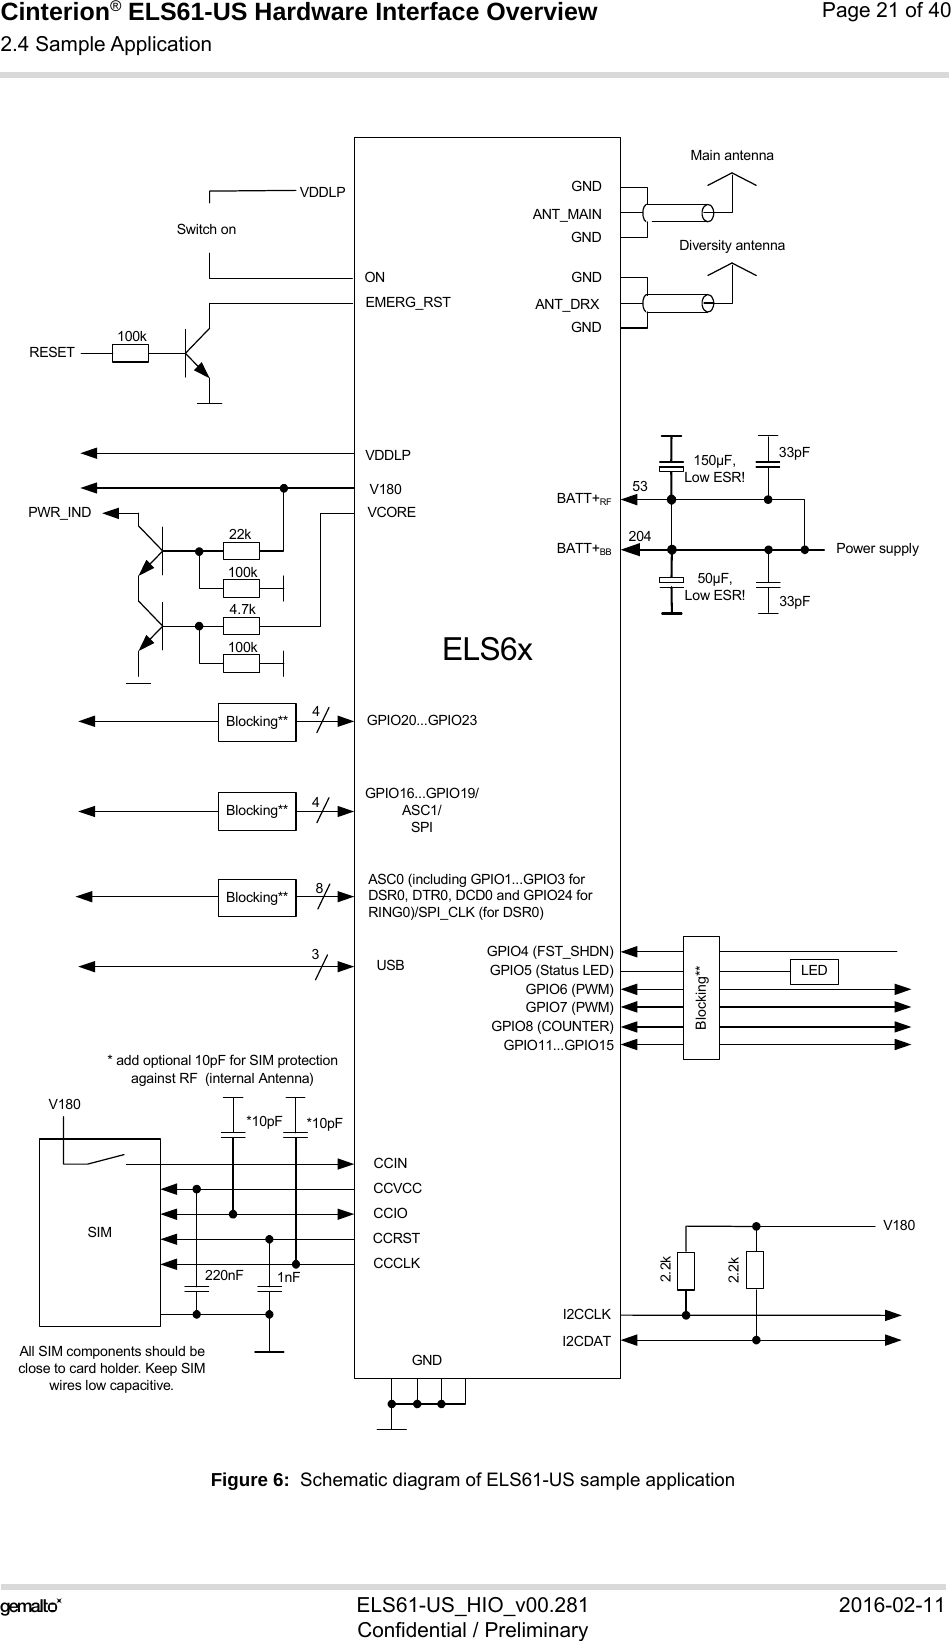 Cinterion® ELS61-US Hardware Interface Overview2.4 Sample Application21ELS61-US_HIO_v00.281 2016-02-11Confidential / PreliminaryPage 21 of 40Figure 6:  Schematic diagram of ELS61-US sample applicationVCOREV180ASC0 (including GPIO1...GPIO3 for DSR0, DTR0, DCD0 and GPIO24 for RING0)/SPI_CLK (for DSR0)GPIO16...GPIO19/ASC1/SPI84CCVCCCCIOCCCLKCCINCCRSTSIMV180220nF 1nFI2CCLKI2CDAT2.2kV180GPIO4 (FST_SHDN) GPIO5 (Status LED)GPIO6 (PWM)GPIO7 (PWM)GPIO8 (COUNTER)GPIO11...GPIO15LEDGNDGNDGNDANT_MAINBATT+RFPower supplyMain antennaELS6xAll SIM components should be close to card holder. Keep SIM wires low capacitive.*10pF *10pF* add optional 10pF for SIM protection against RF  (internal Antenna)50µF,Low ESR! 33pFBlocking**Blocking**Blocking**PWR_INDBATT+BB53204GPIO20...GPIO234Blocking**100k4.7k100k22k2.2k3USB150µF,Low ESR!33pFGNDGNDANT_DRXDiversity antennaONEMERG_RSTRESETVDDLP100kVDDLPSwitch on